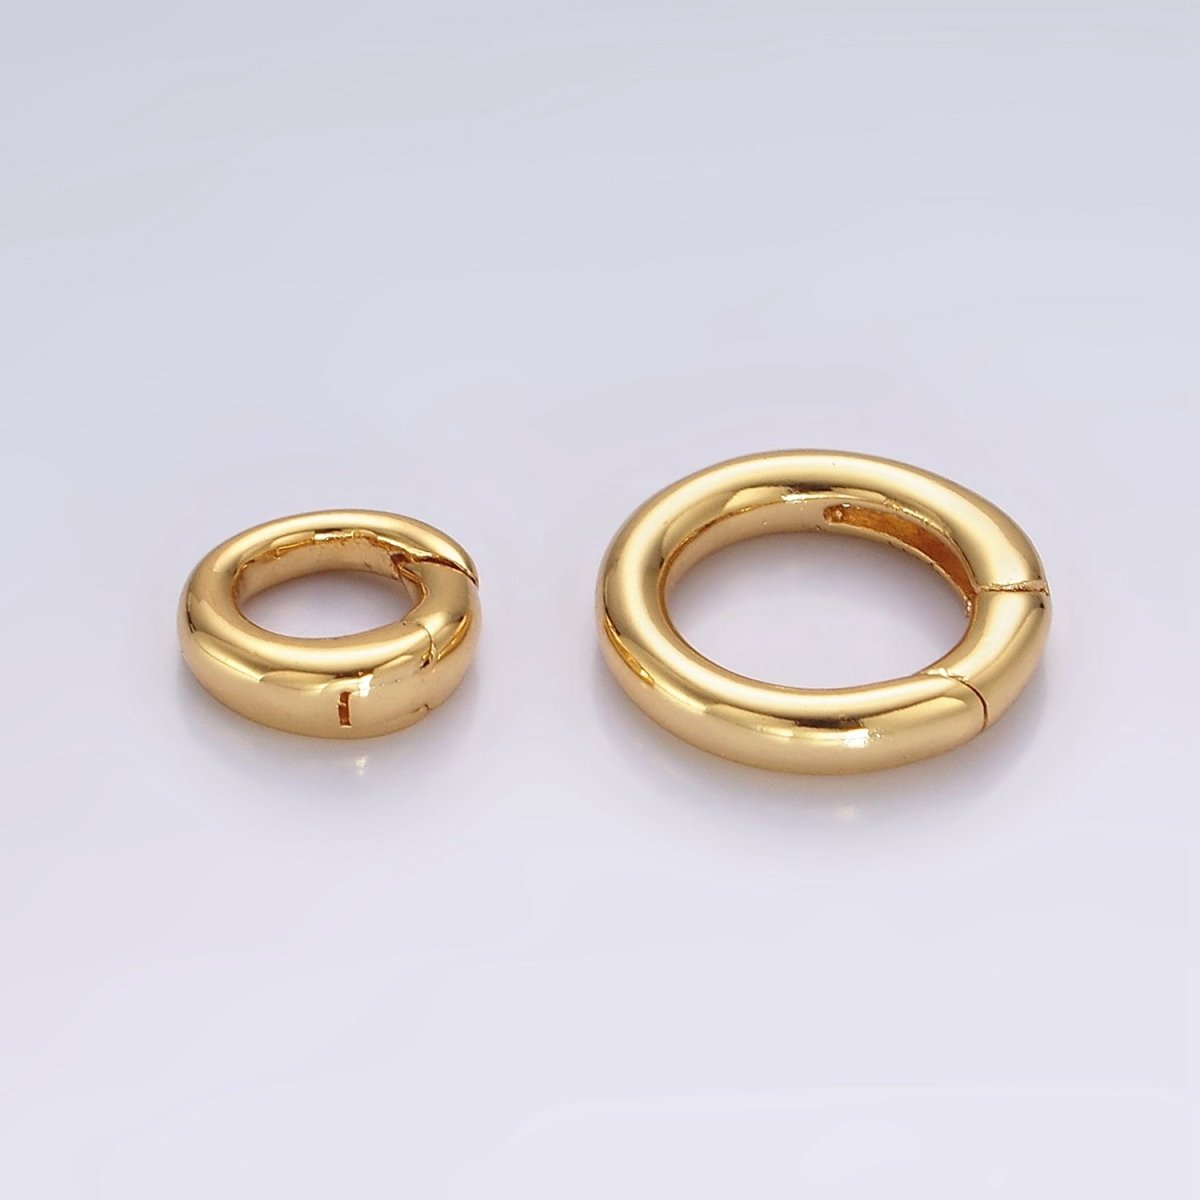 14K Gold Filled 14.5mm, 10mm Push Round Spring Gate Ring Jewelry Closure Findings Supply | Z570 Z571 - DLUXCA